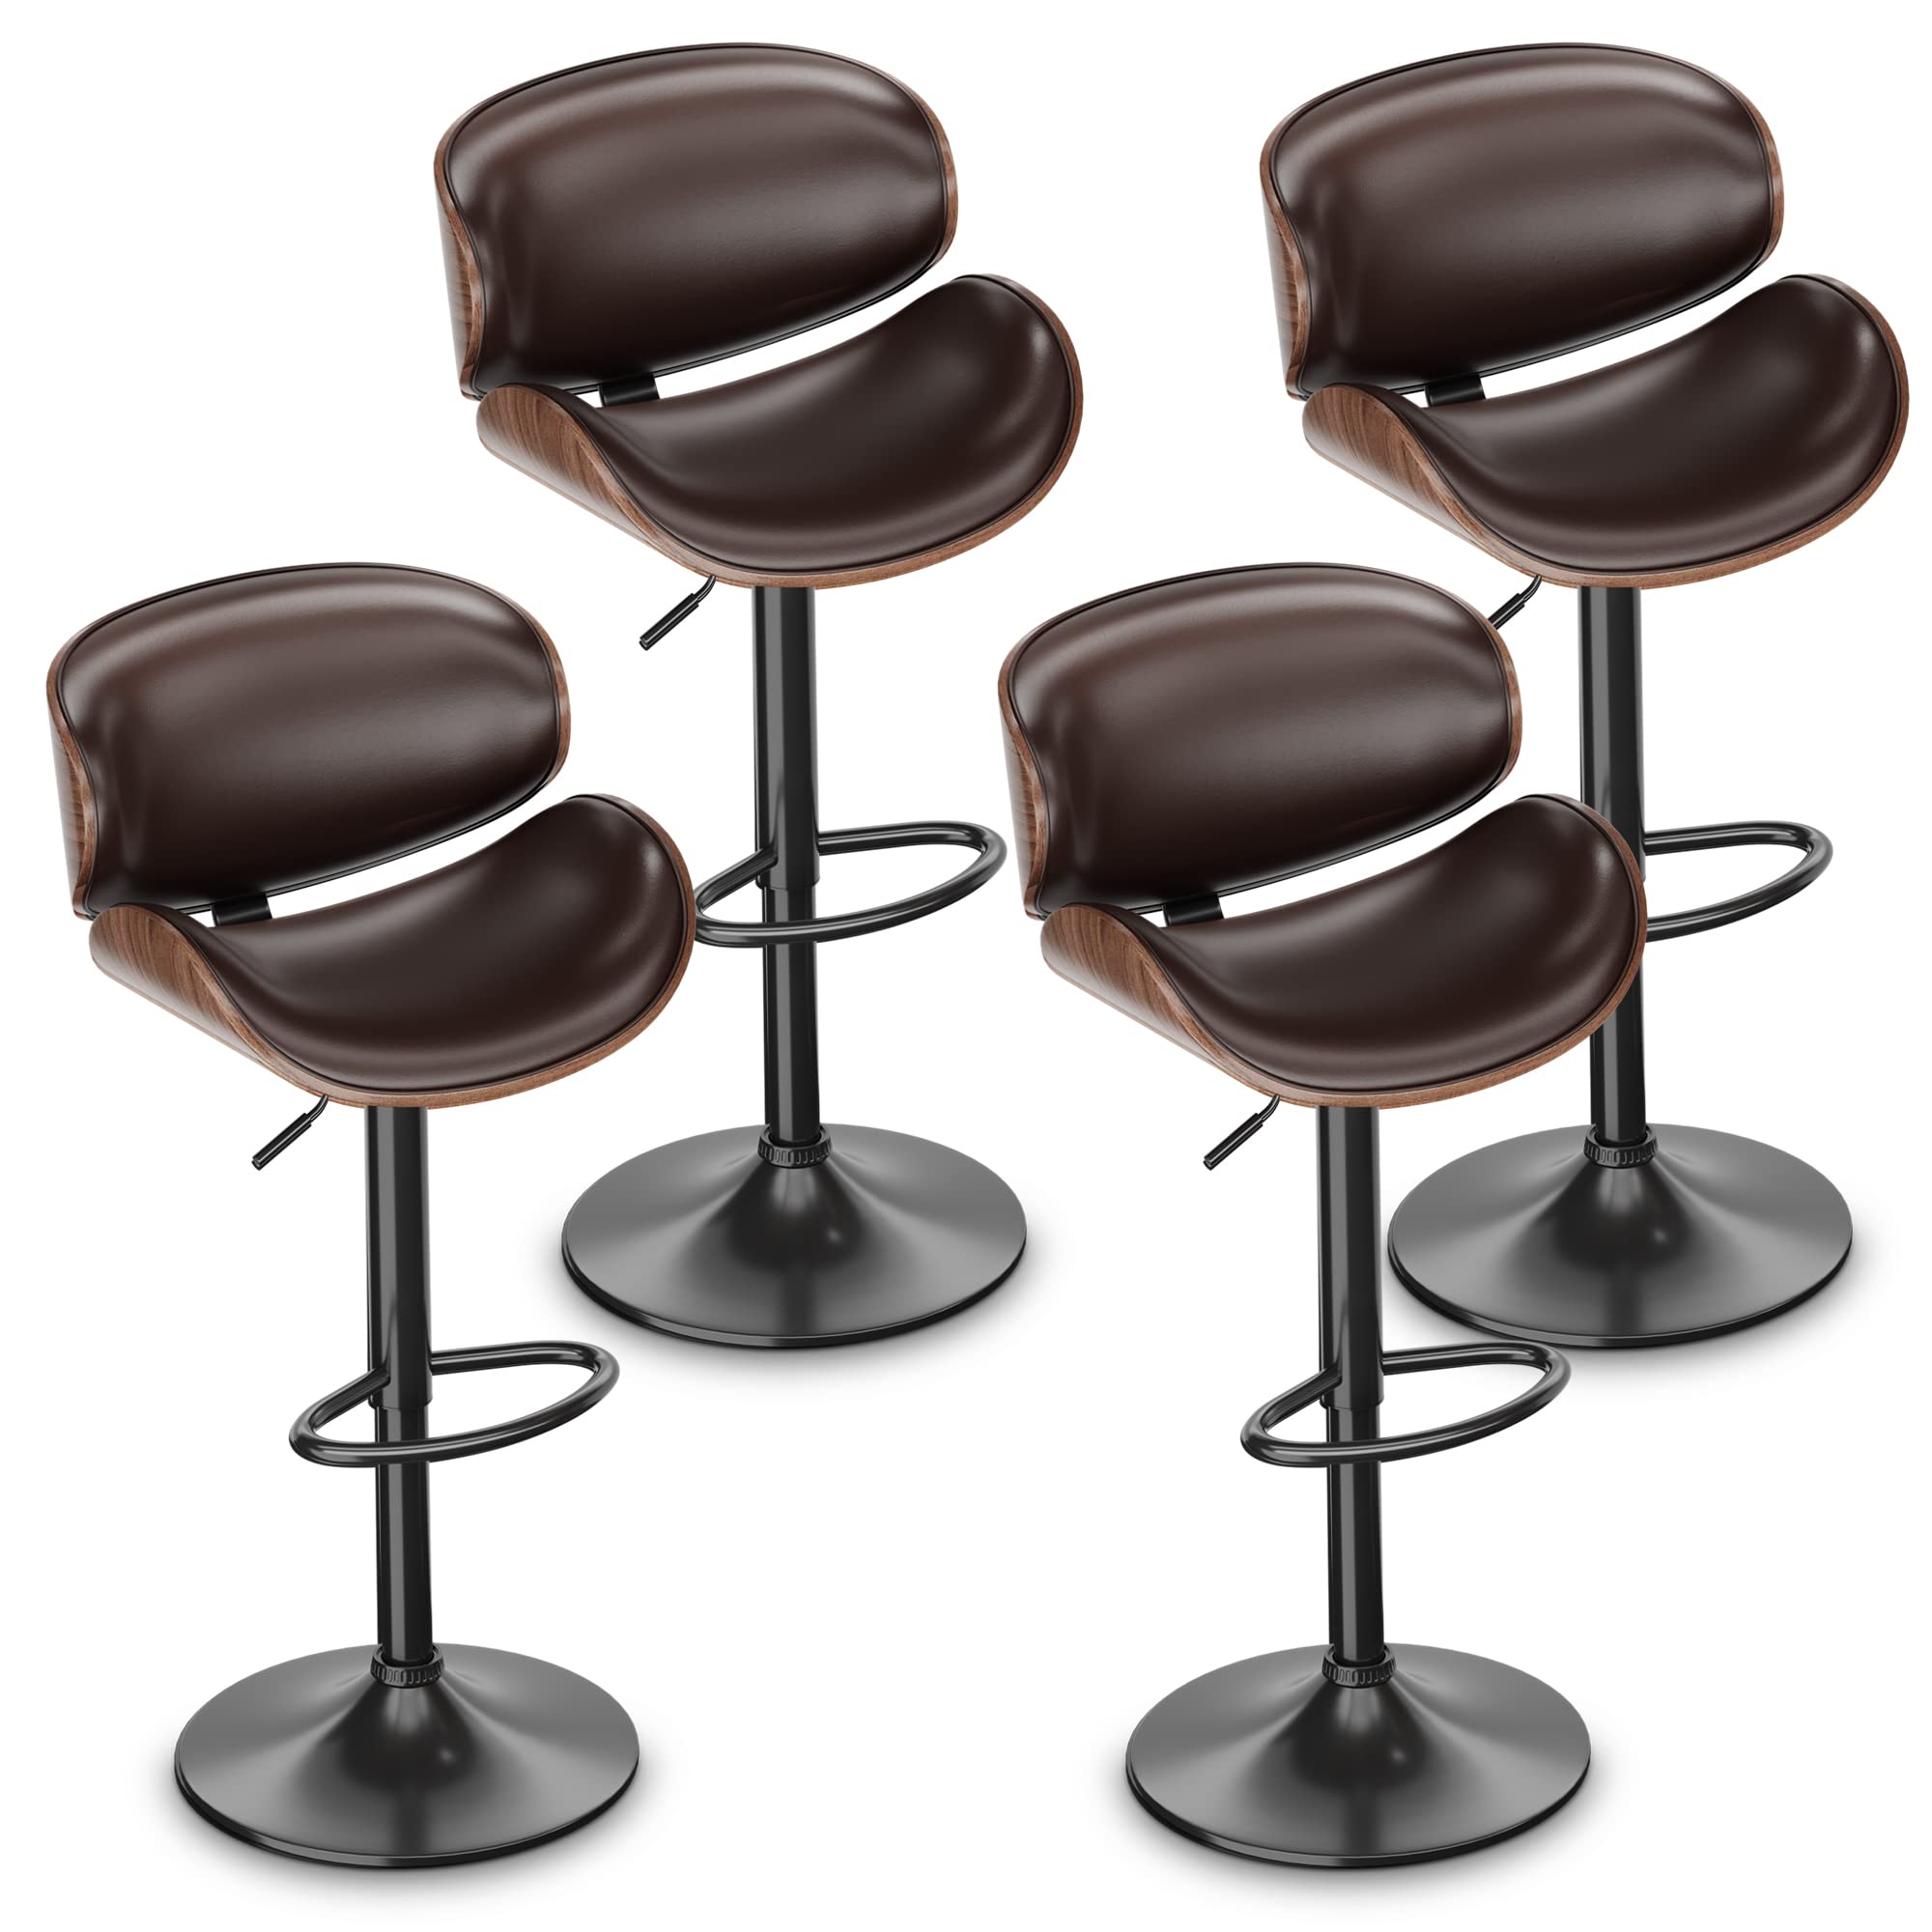 Aowos Adjustable Swivel Bar Stools Set of 4, Mid-Century Modern PU Leather Upholstered Counter Height Bar Stool, Kitchen Island 